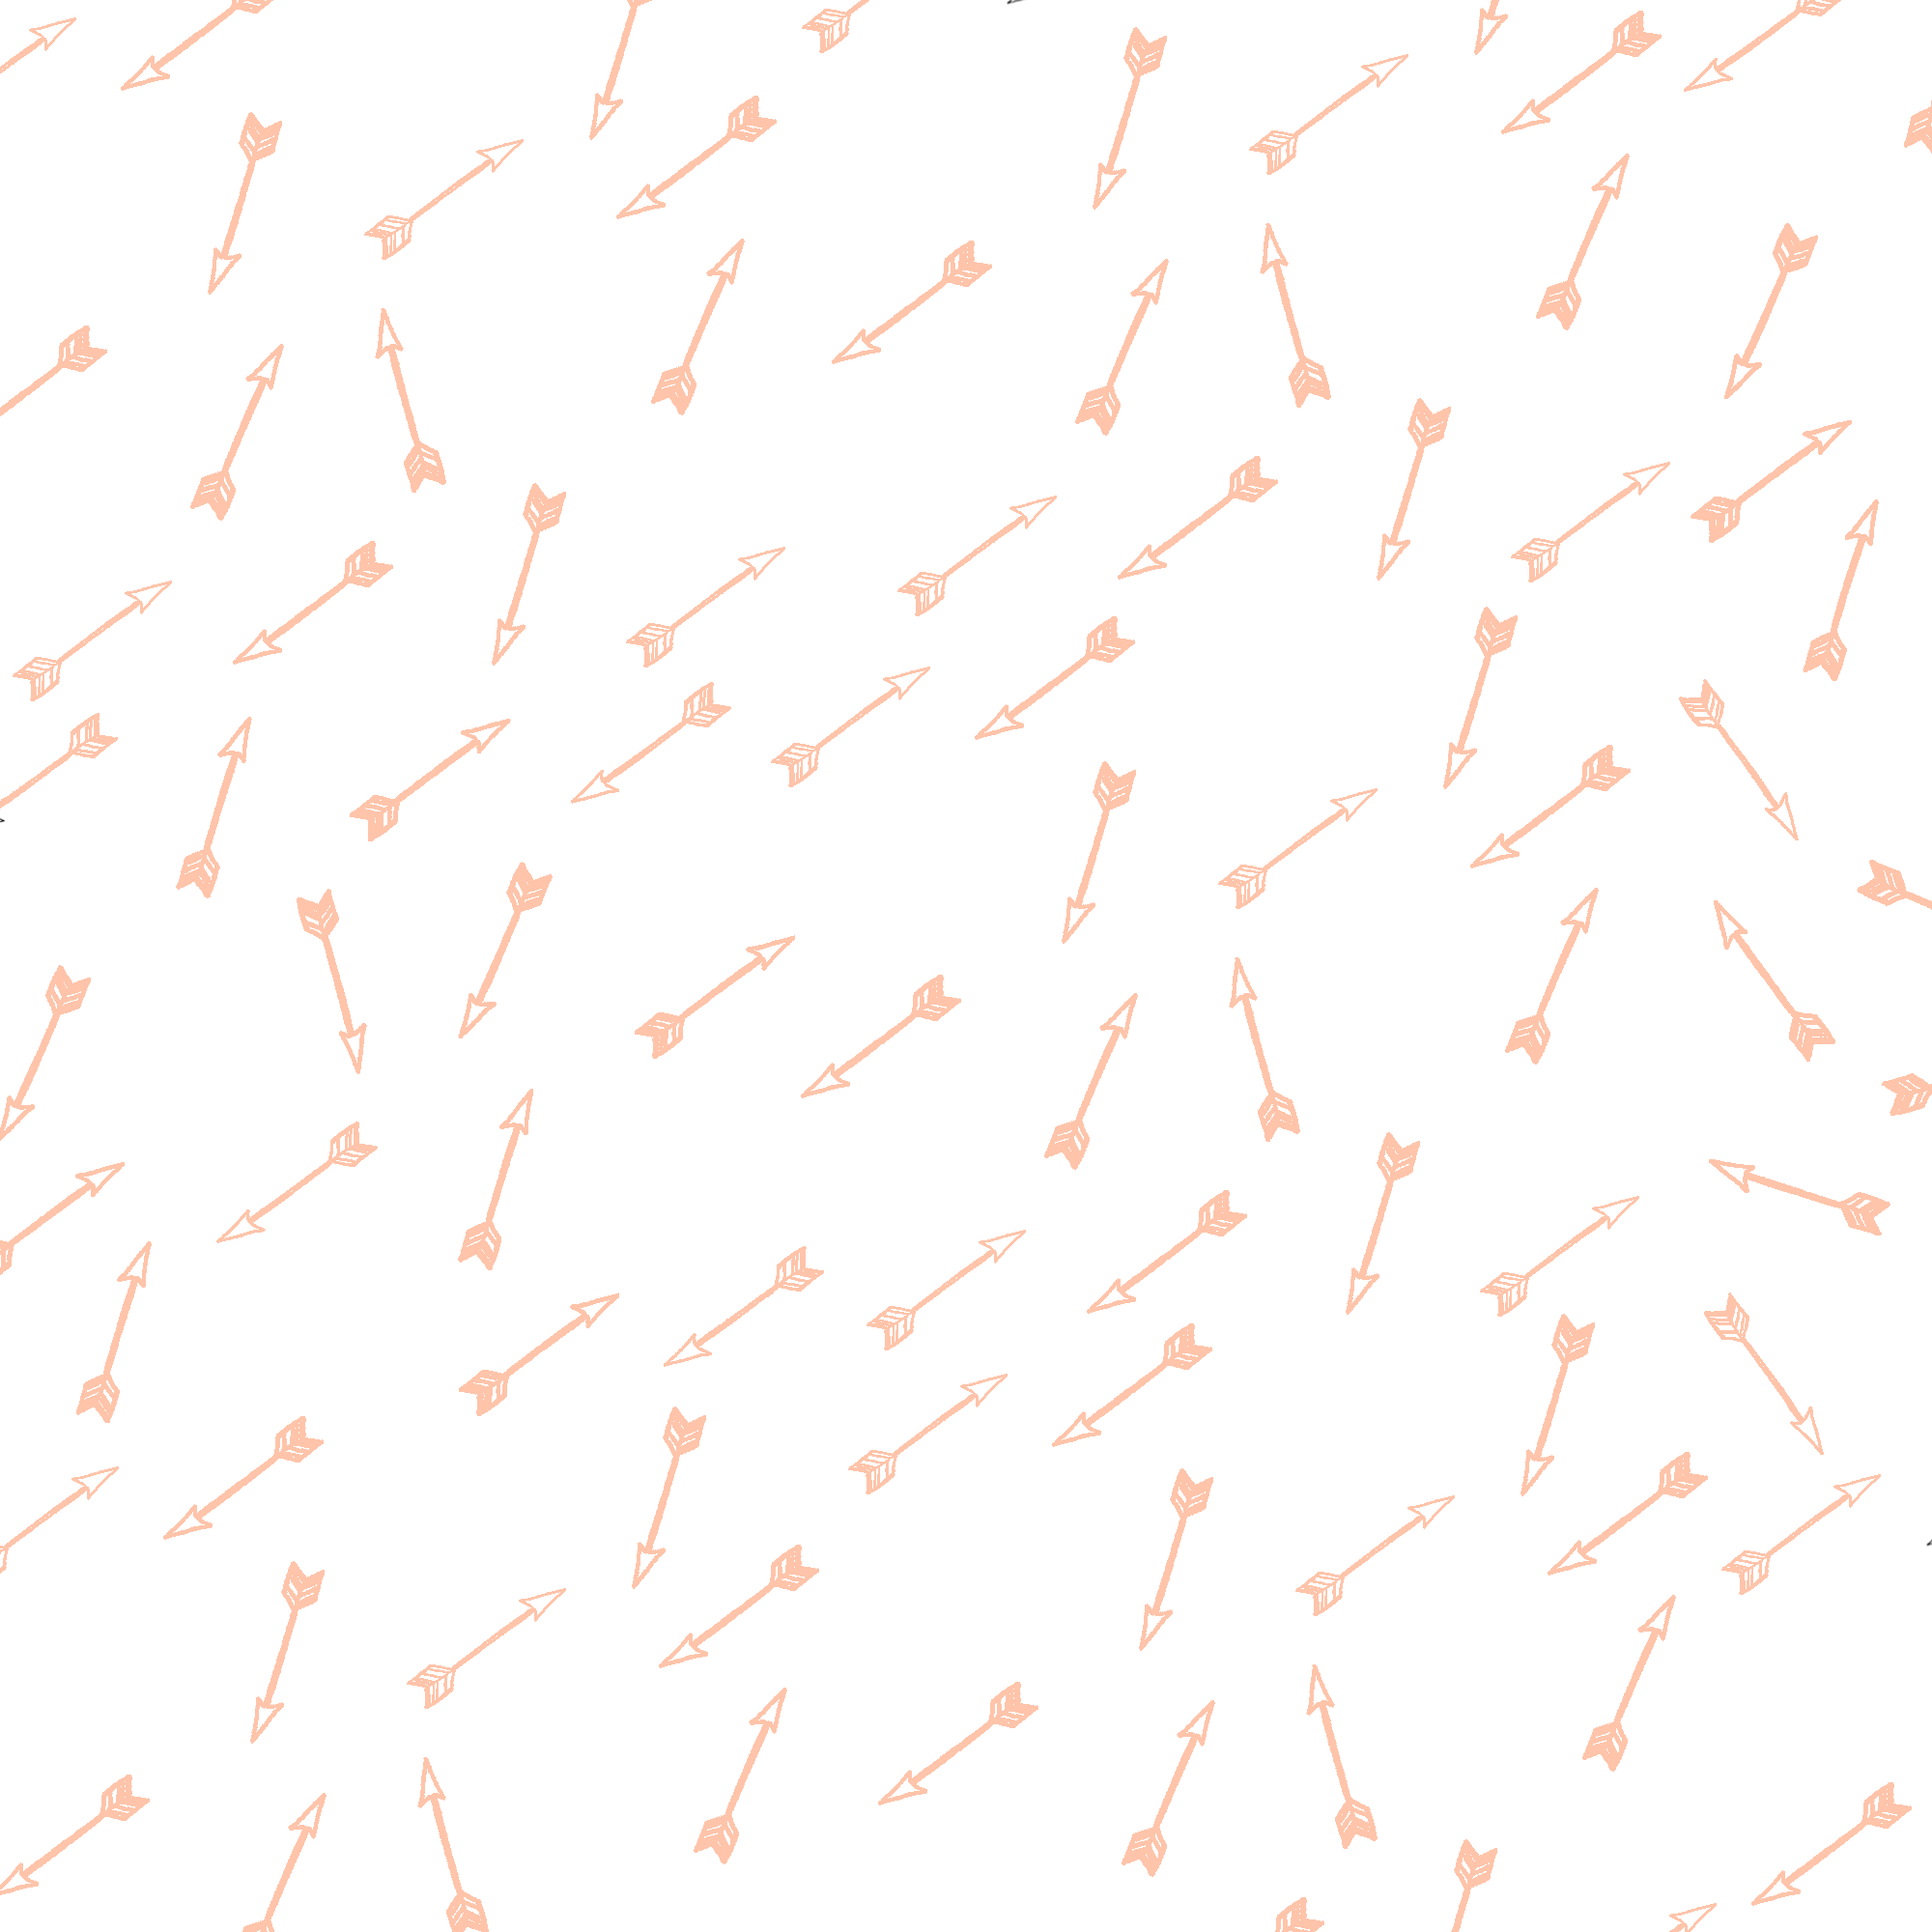 Happy Arrow Pattern For The Desktop Background Or Printable Wrapping